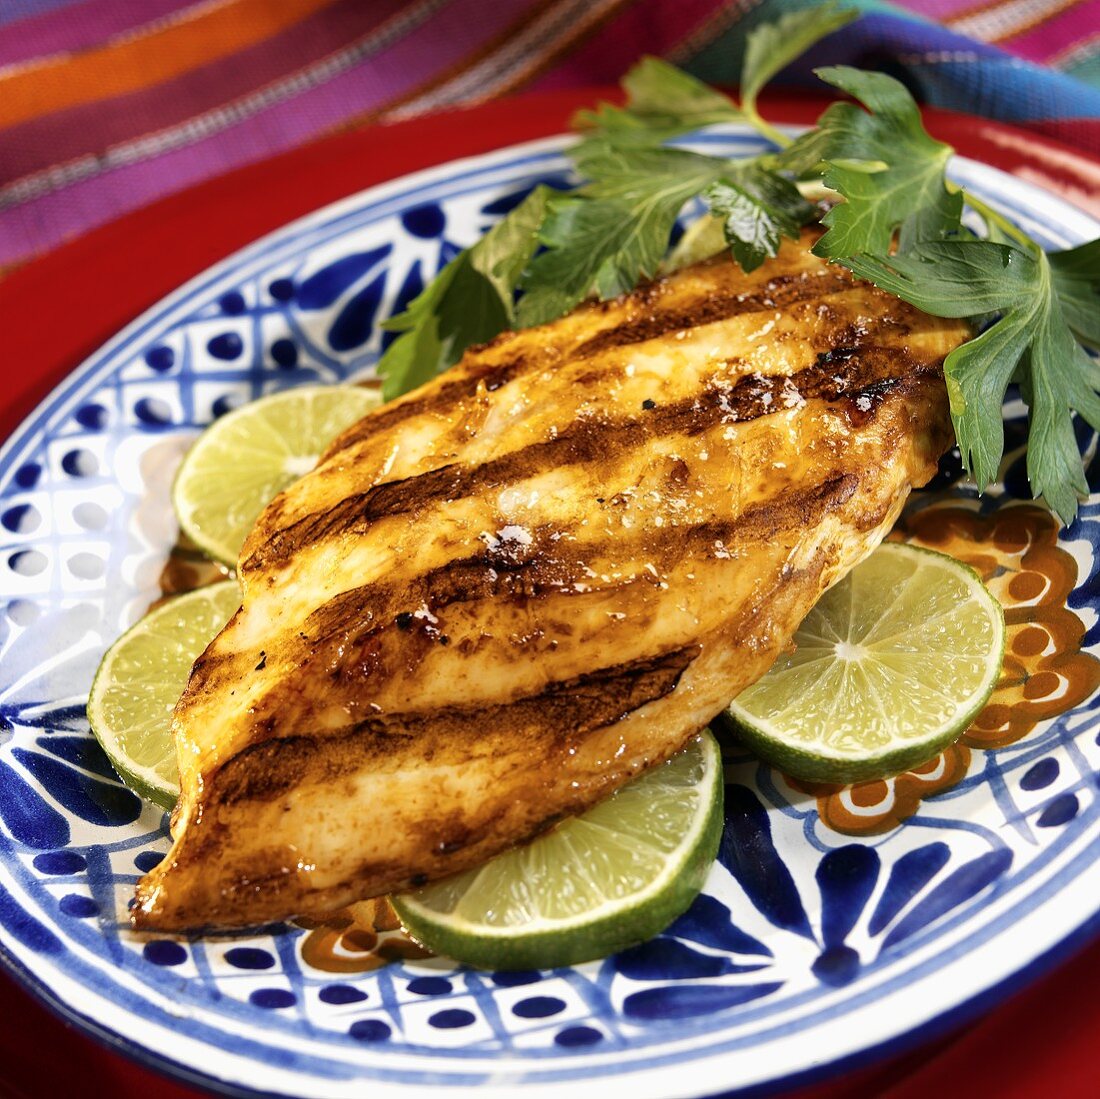 Barbecued chicken breast, marinated in lime and Tequila